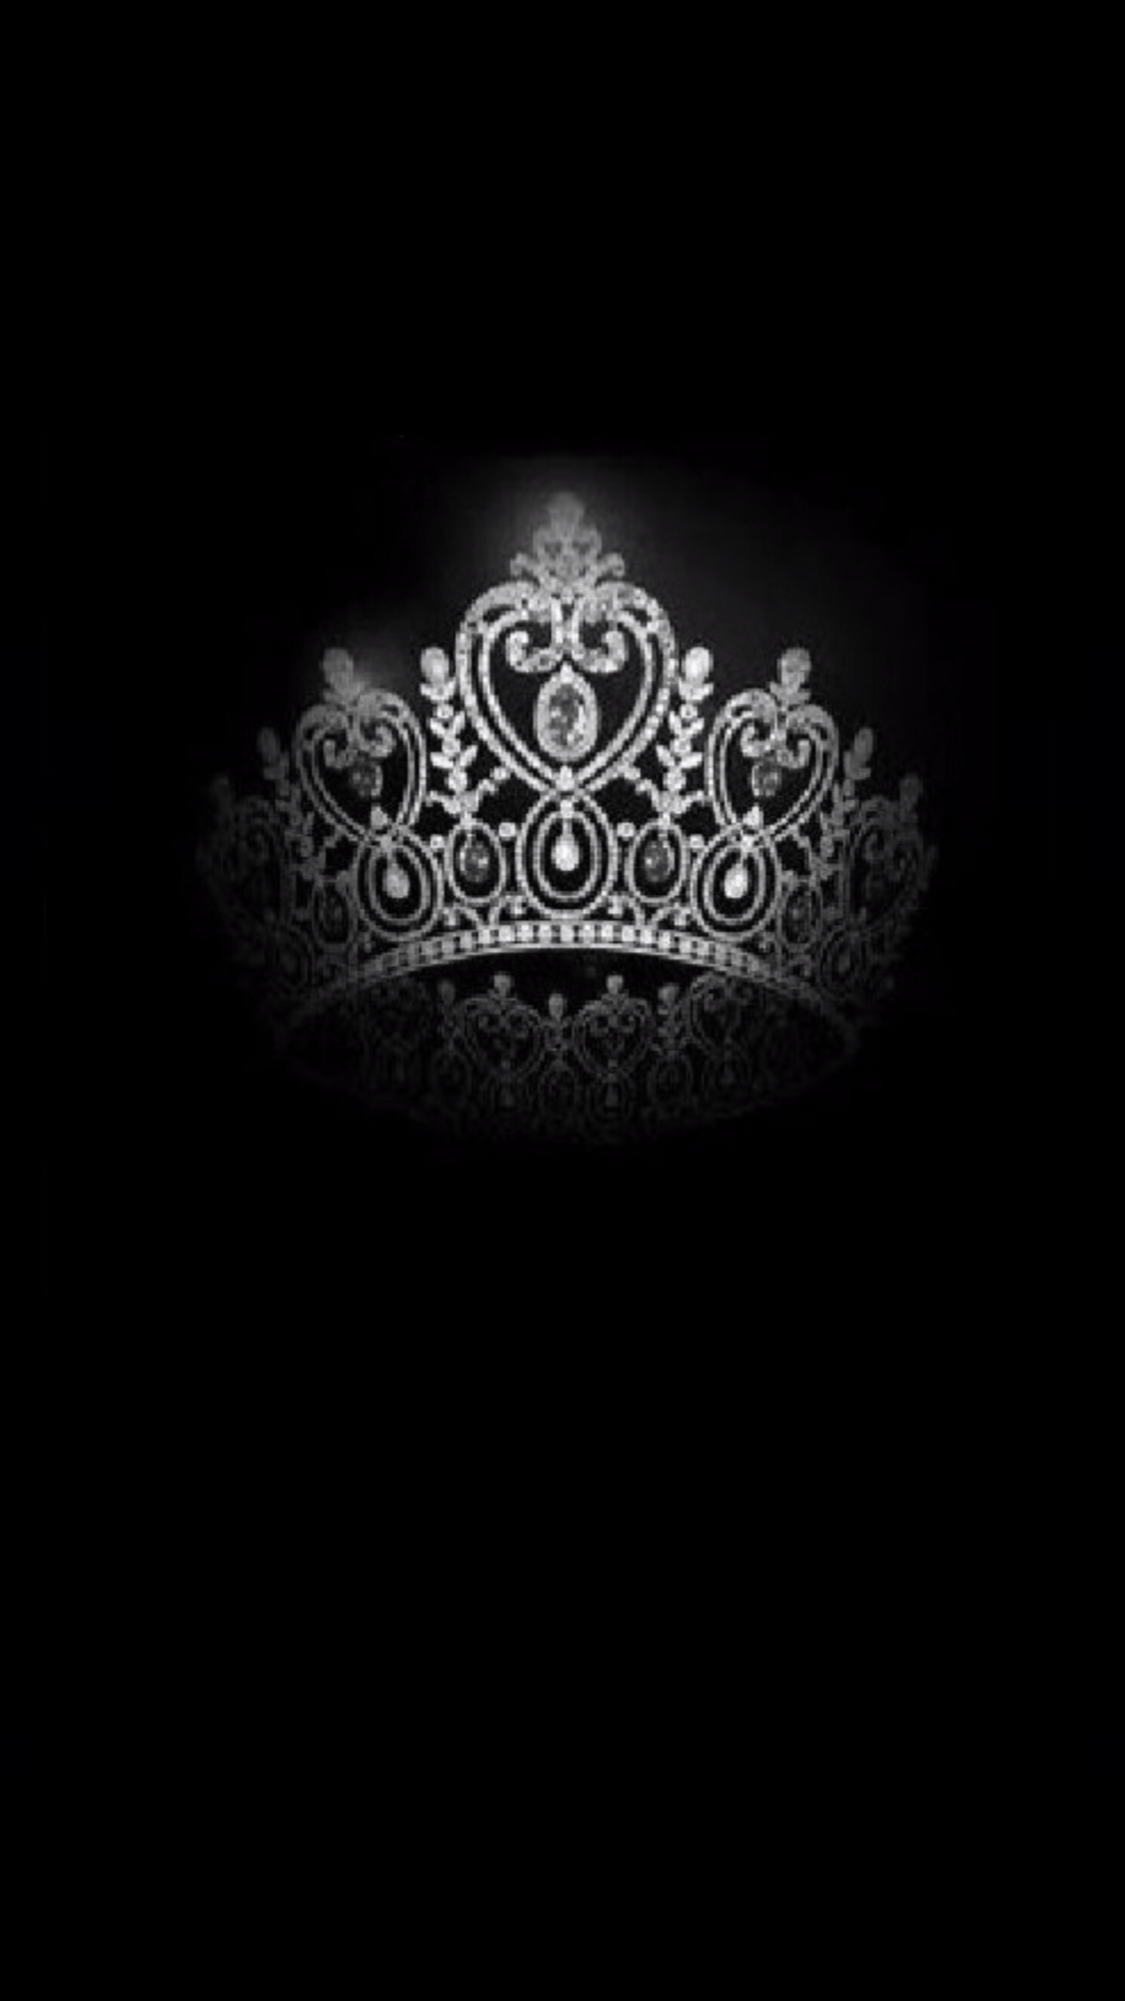 King and Queen Crown Wallpapers - Top Free King and Queen Crown